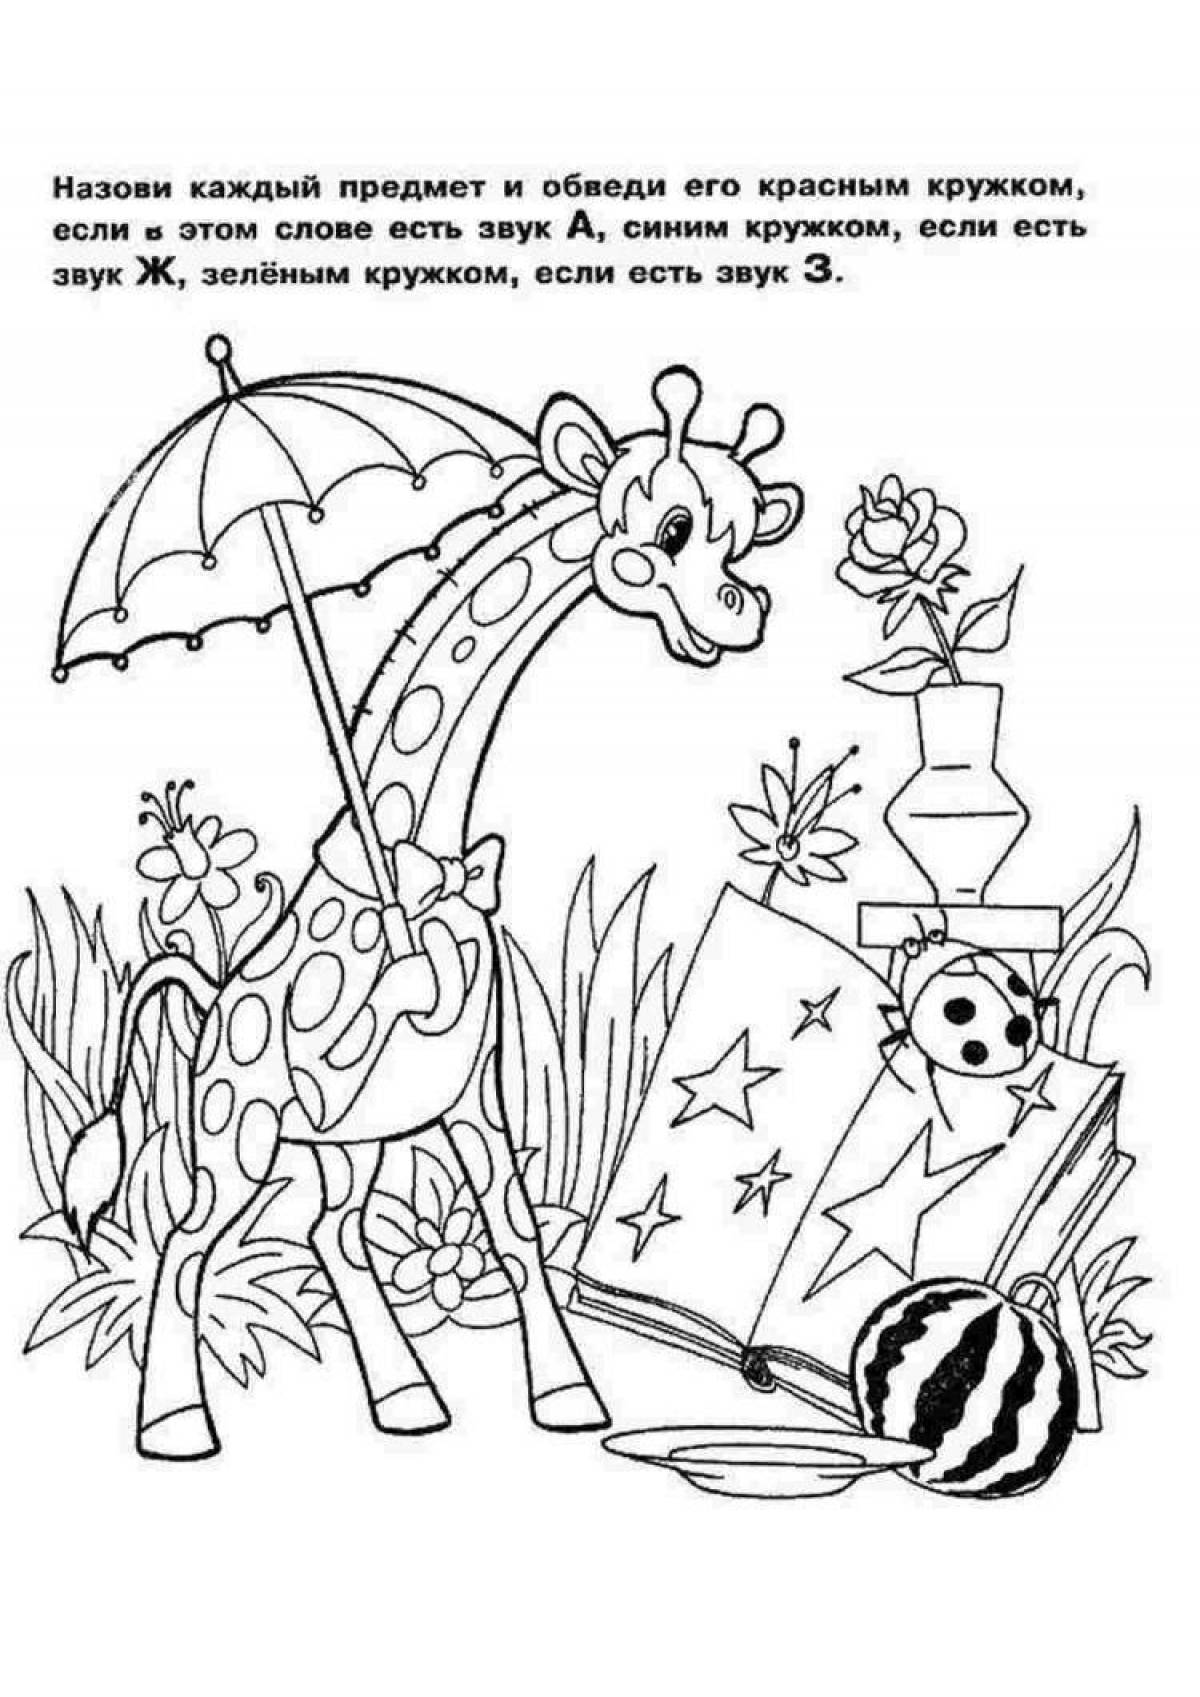 A fascinating coloring book with the alphabet for children 5-6 years old